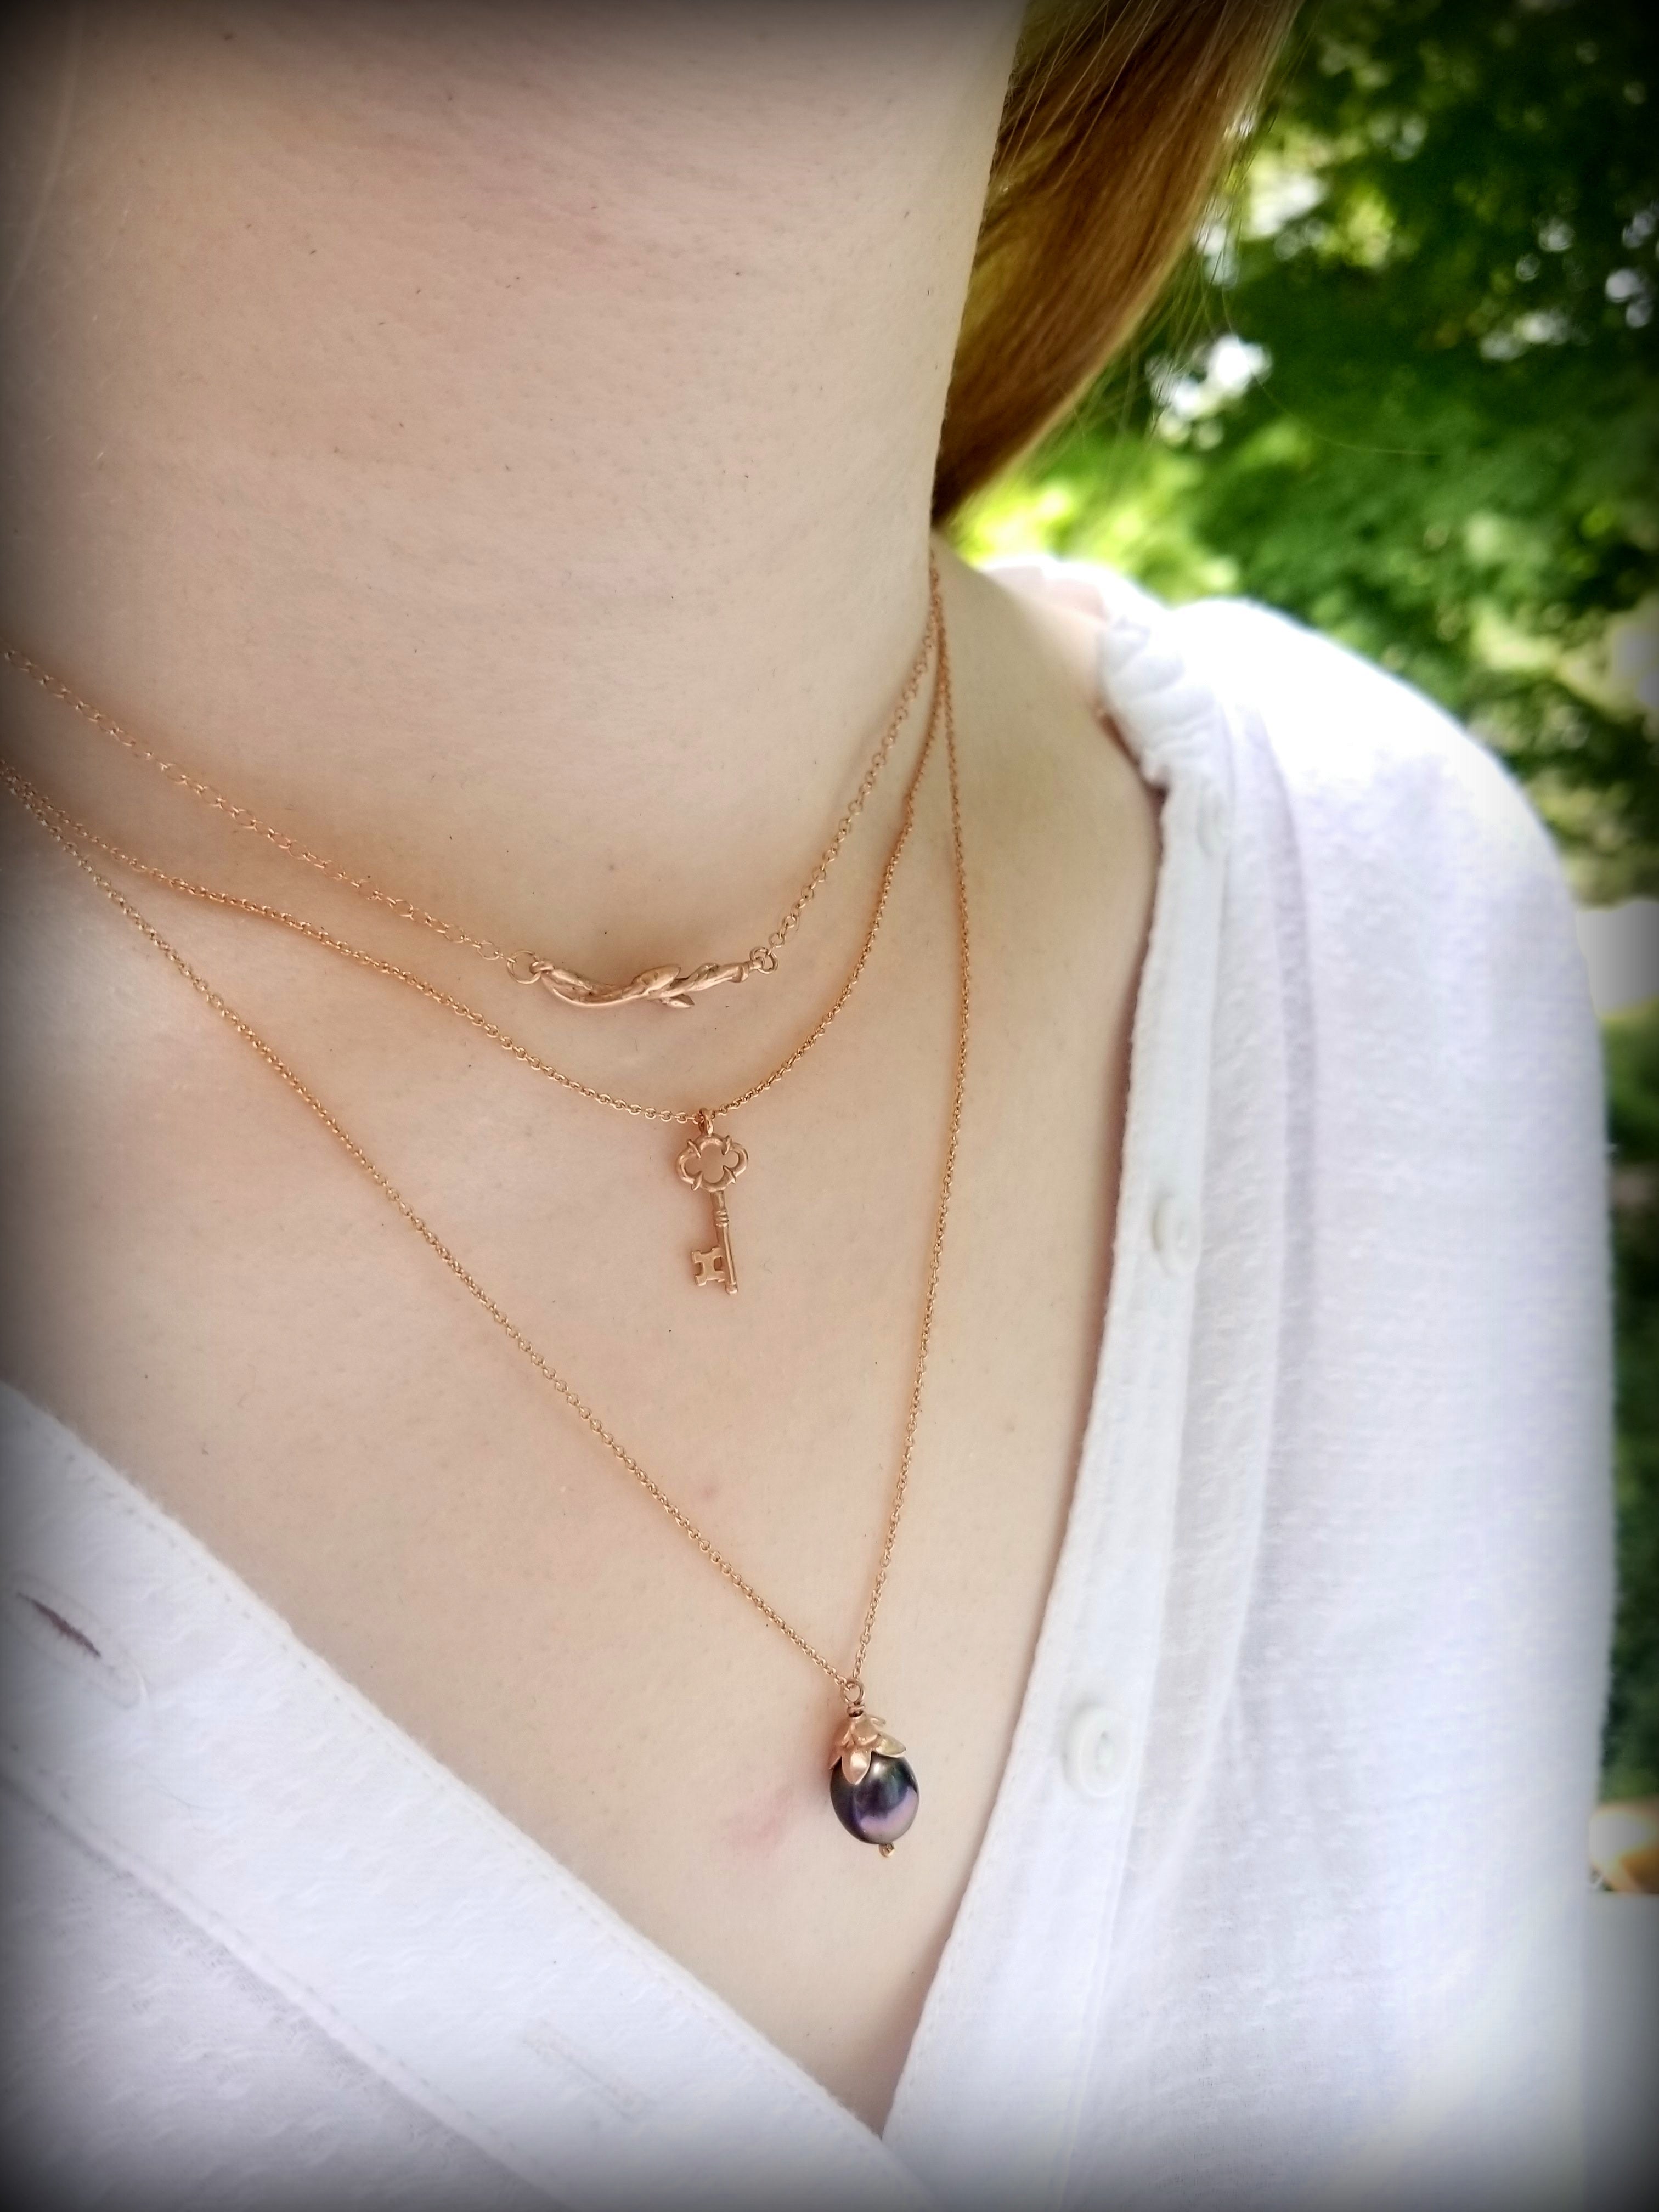 Rose Gold layers handcrafted by T and Brie: Budding Branch Necklace, Cybele Key Charm necklace, Black Dahlia Bud Necklace©Teresa de la Guardia, All Rights Reserved